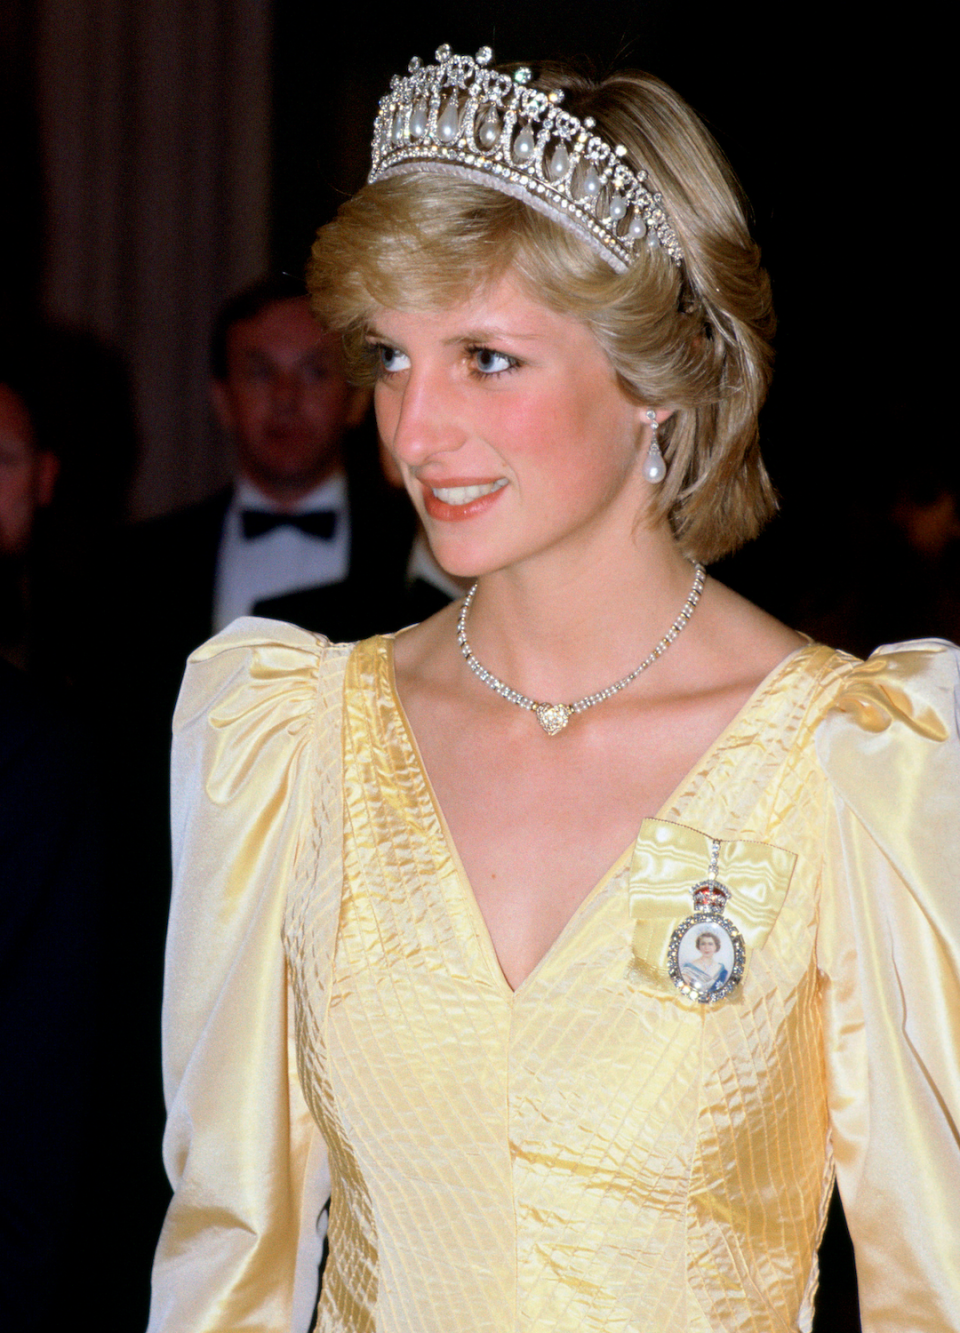 Princess Diana was linked to the Lover's Knot Tiara